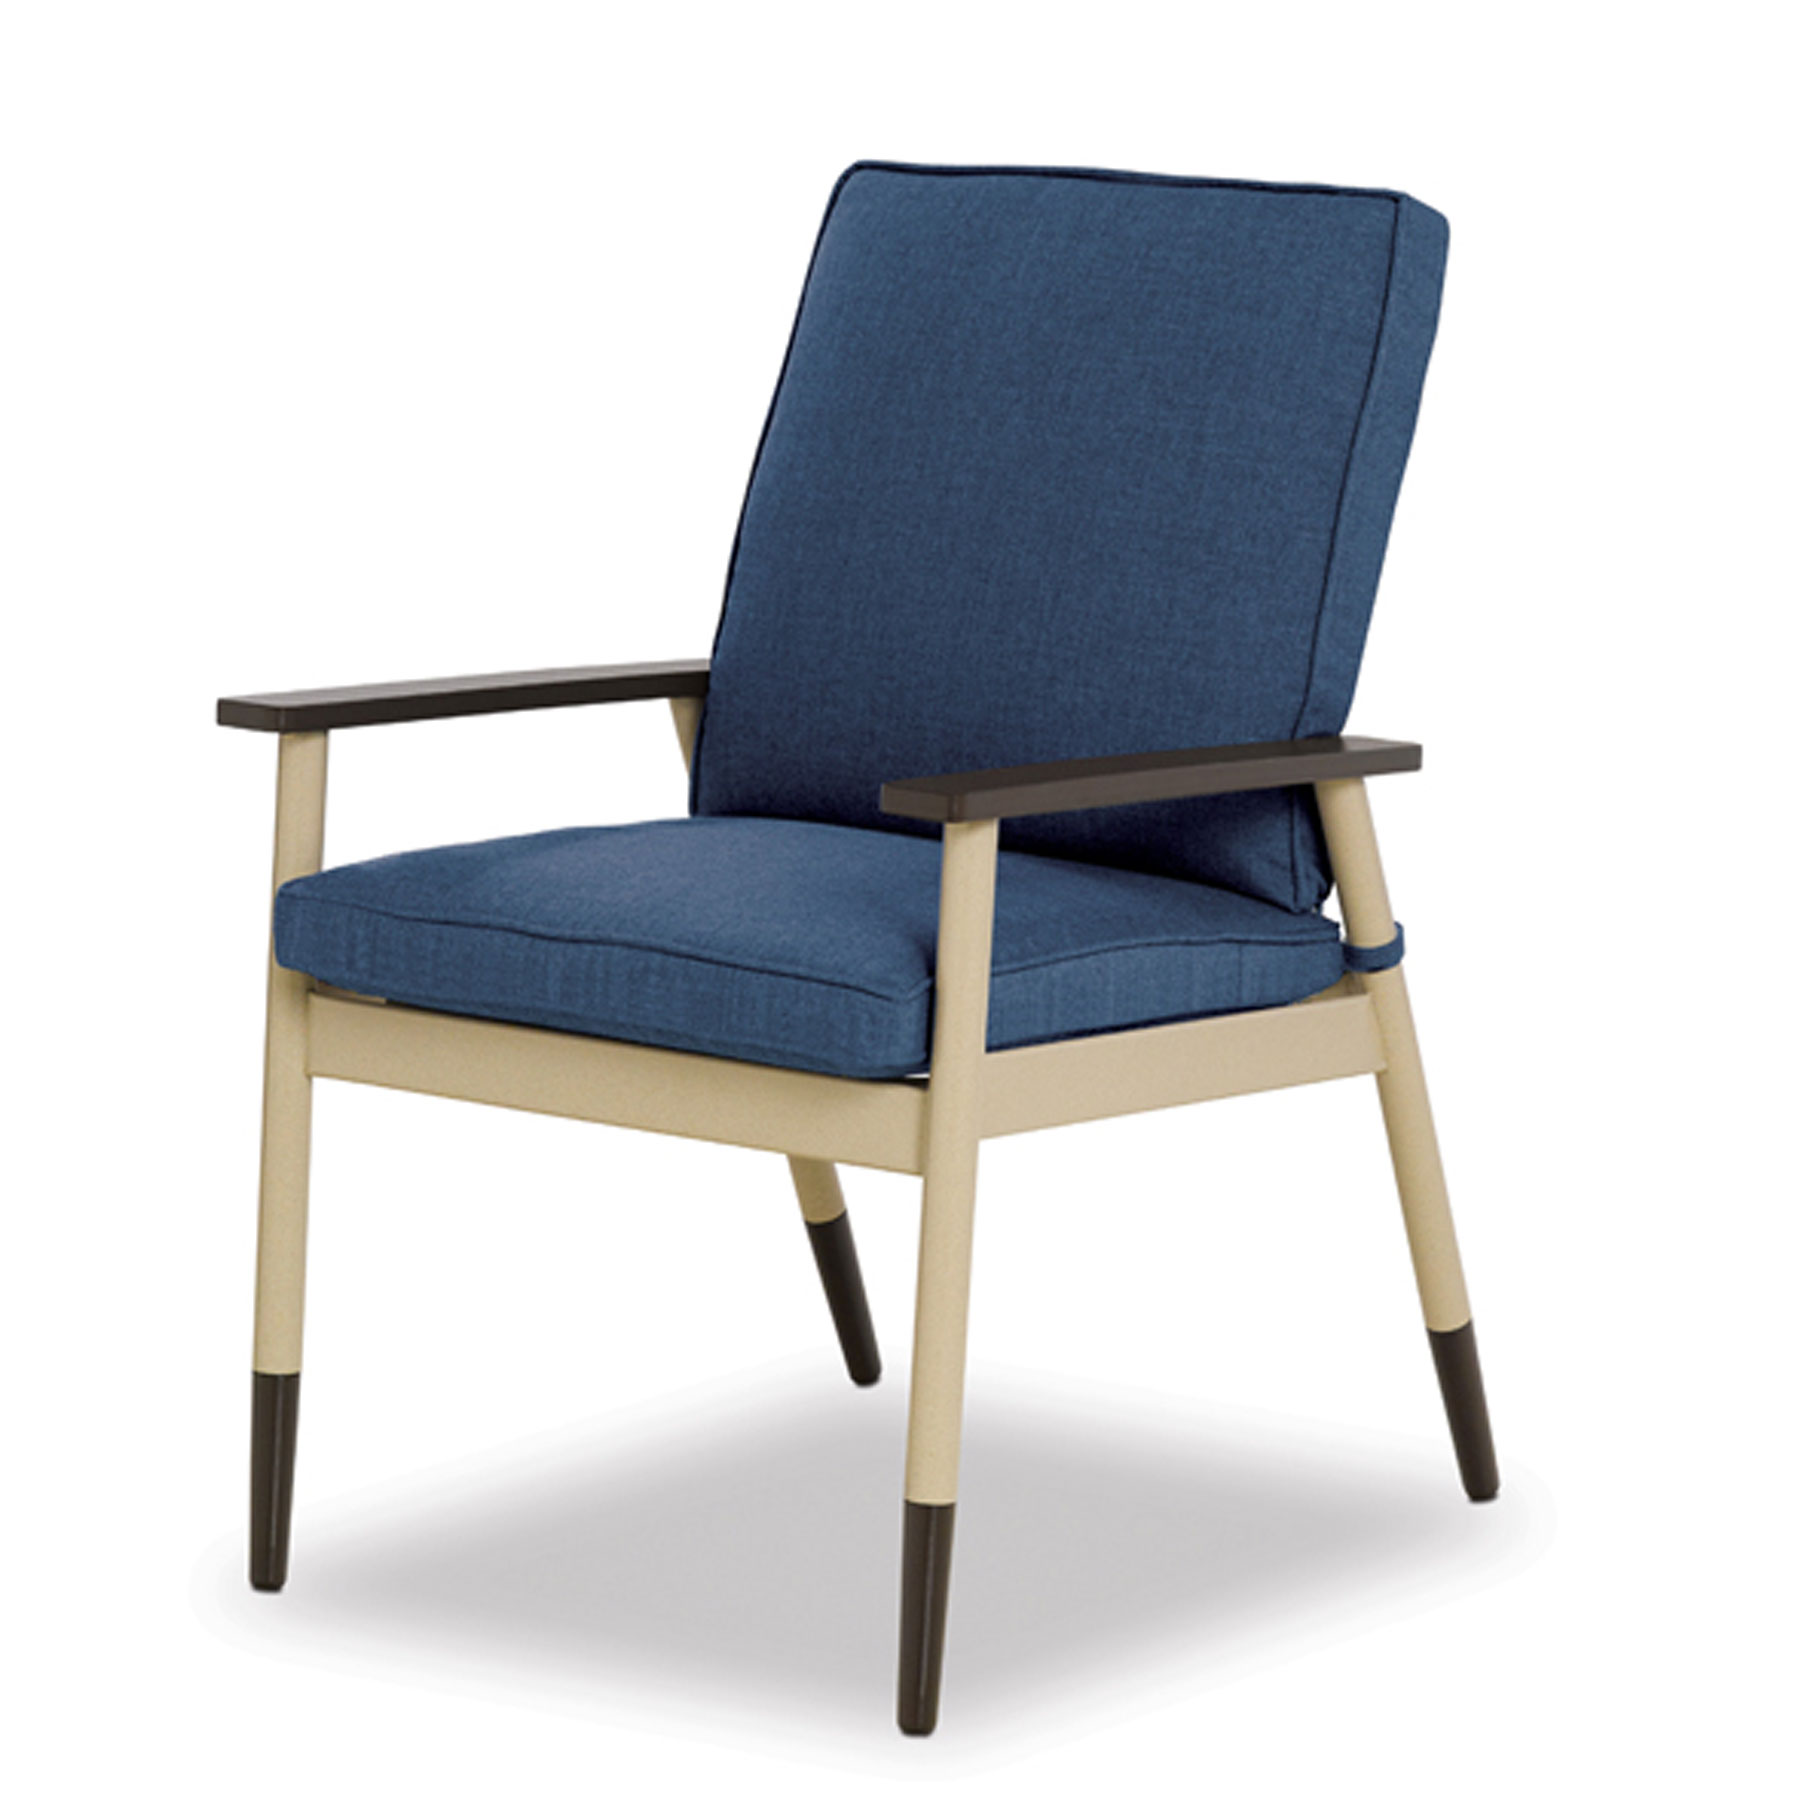 Telescope Casual Welles Cafe Dining Chair with Welting